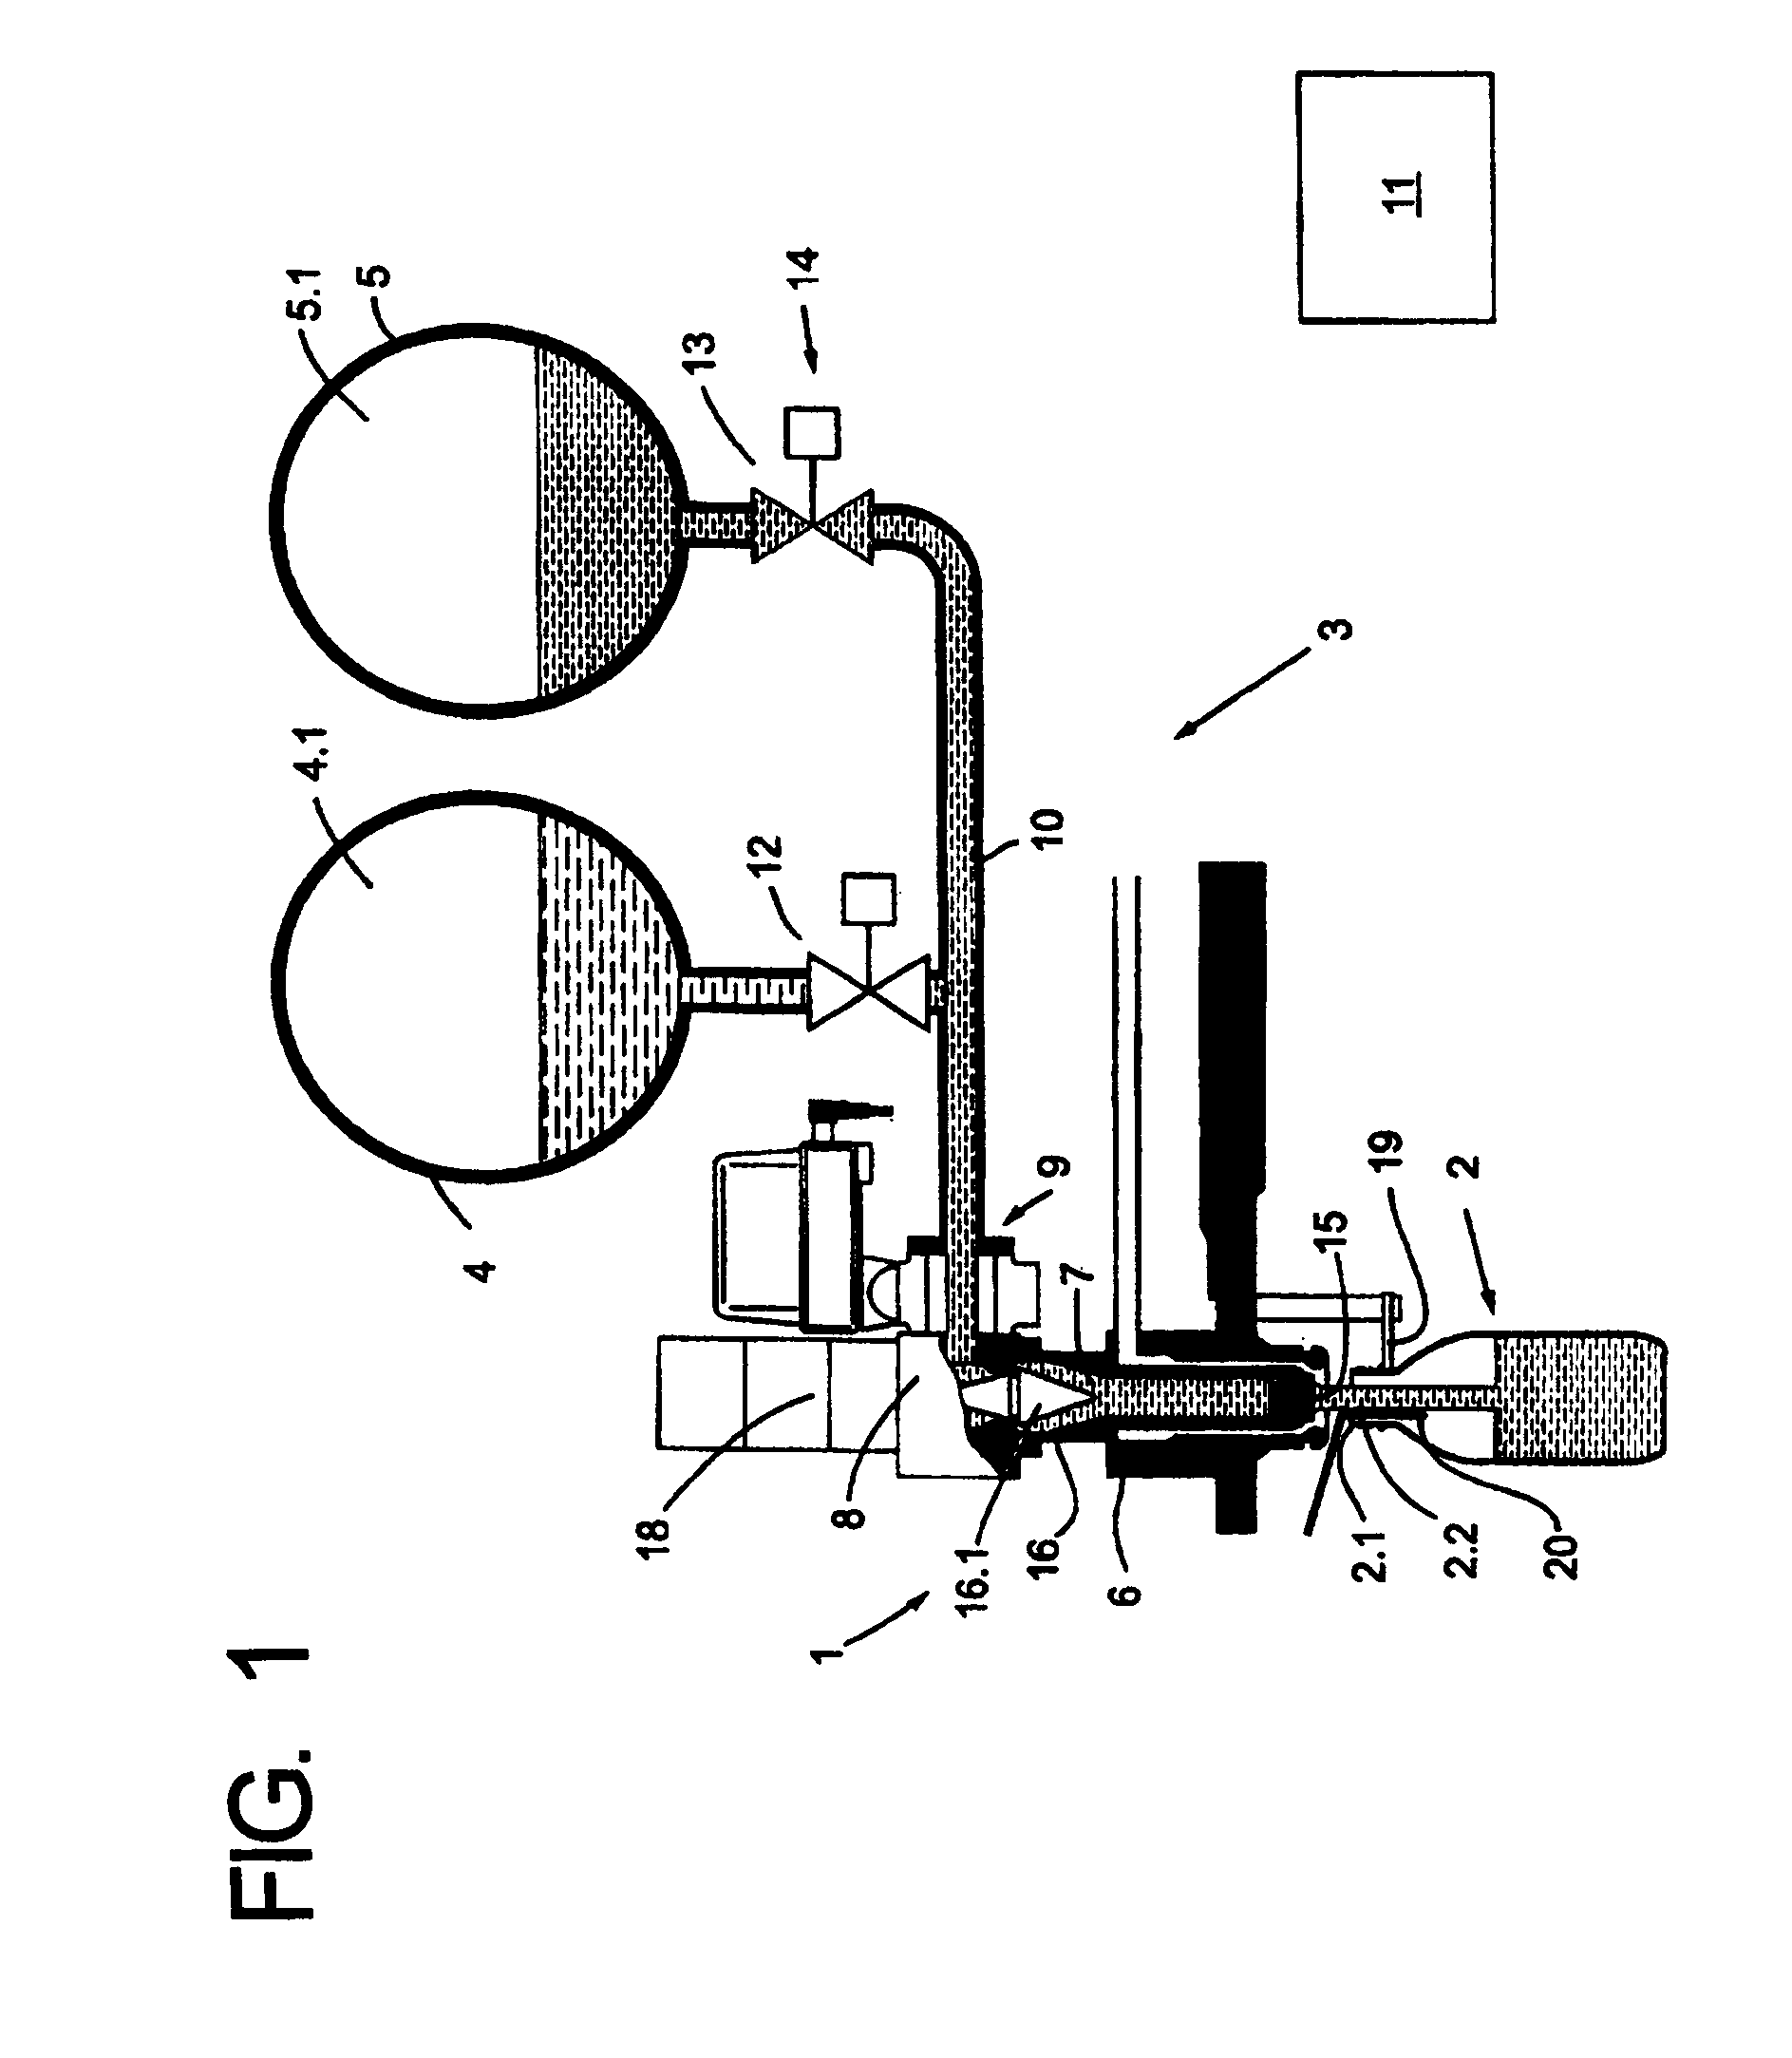 Method and apparatus for filling beverage bottles, in a beverage bottling plant, with a beverage material comprising a carbonated water component and a liquid flavoring component, and method and apparatus for filling containers, in a container filling plant, with a material comprising a first ingredient and a second ingredient